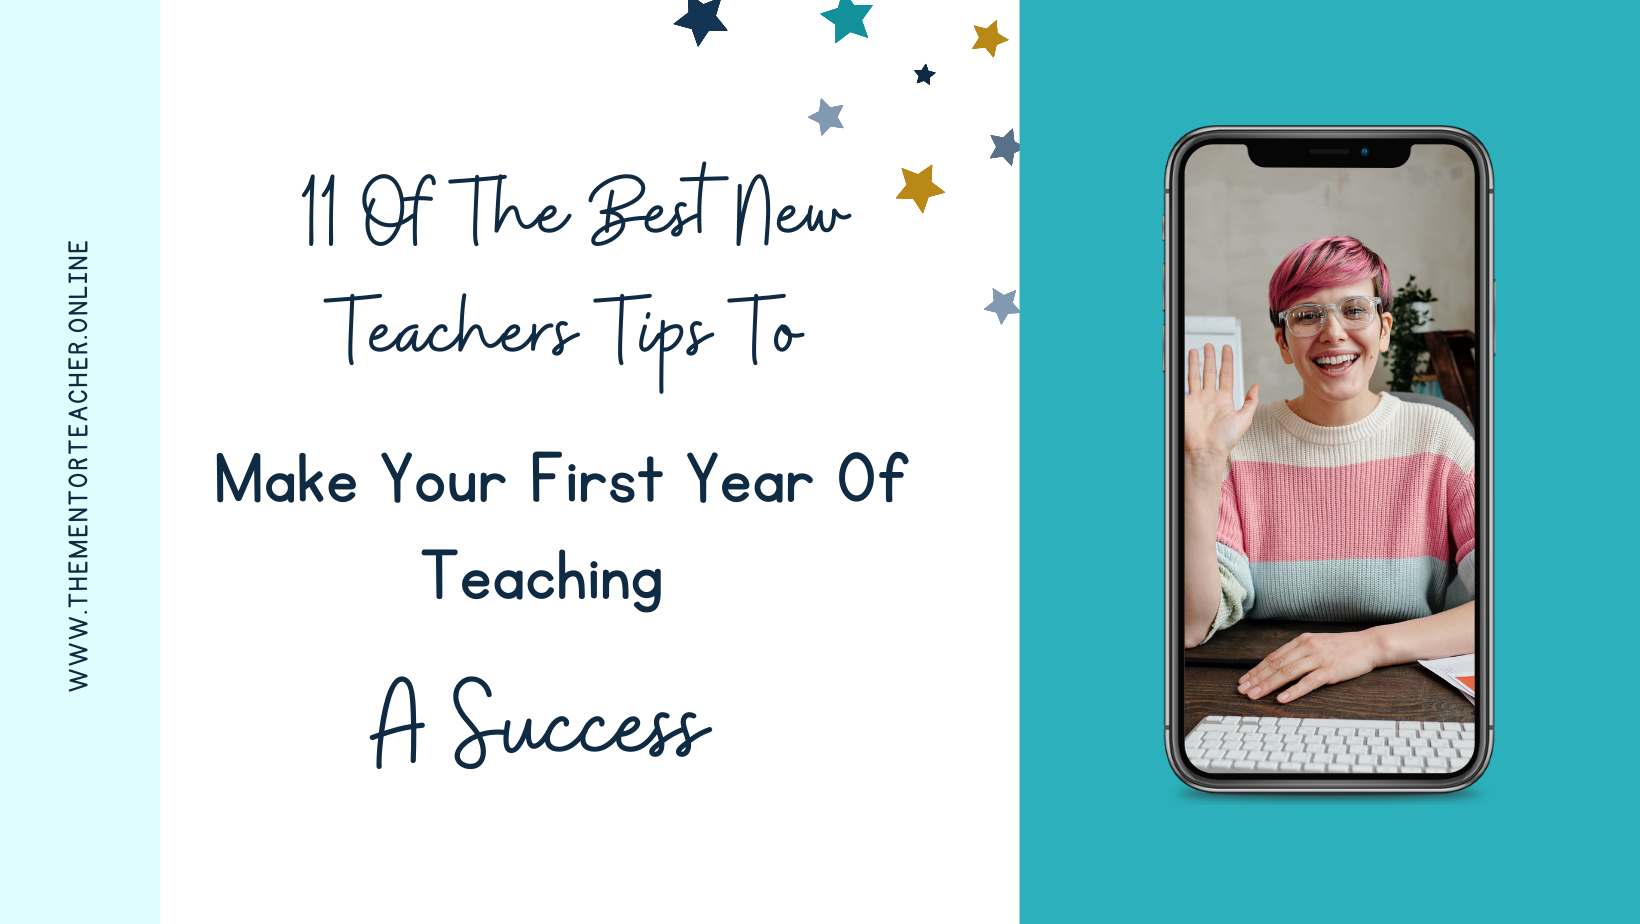 title on a white background says 11 of the best new teachers tips to make your first year of teaching a success, next the the picture of a lady waving, wearing a stripy jumper with died pink hair.